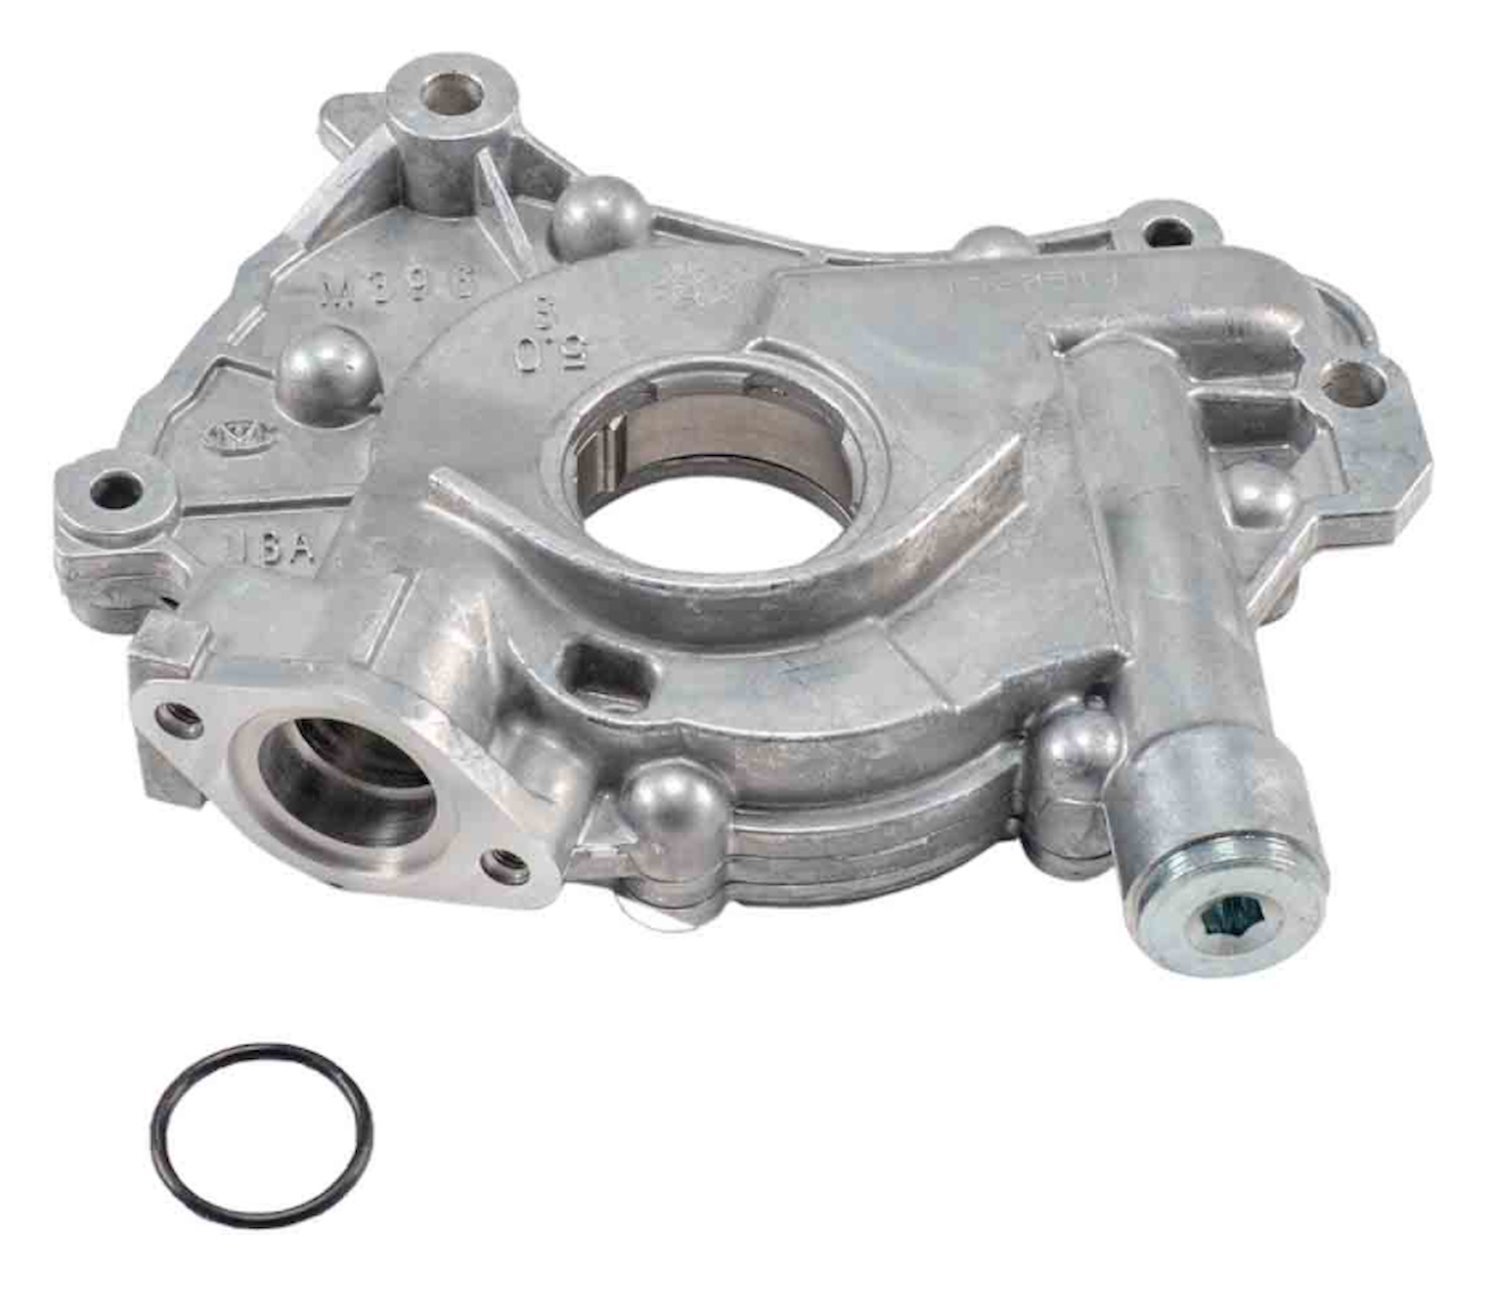 Oil Pump Fits Select Late-Model Ford F-150 & Mustang 5.0L